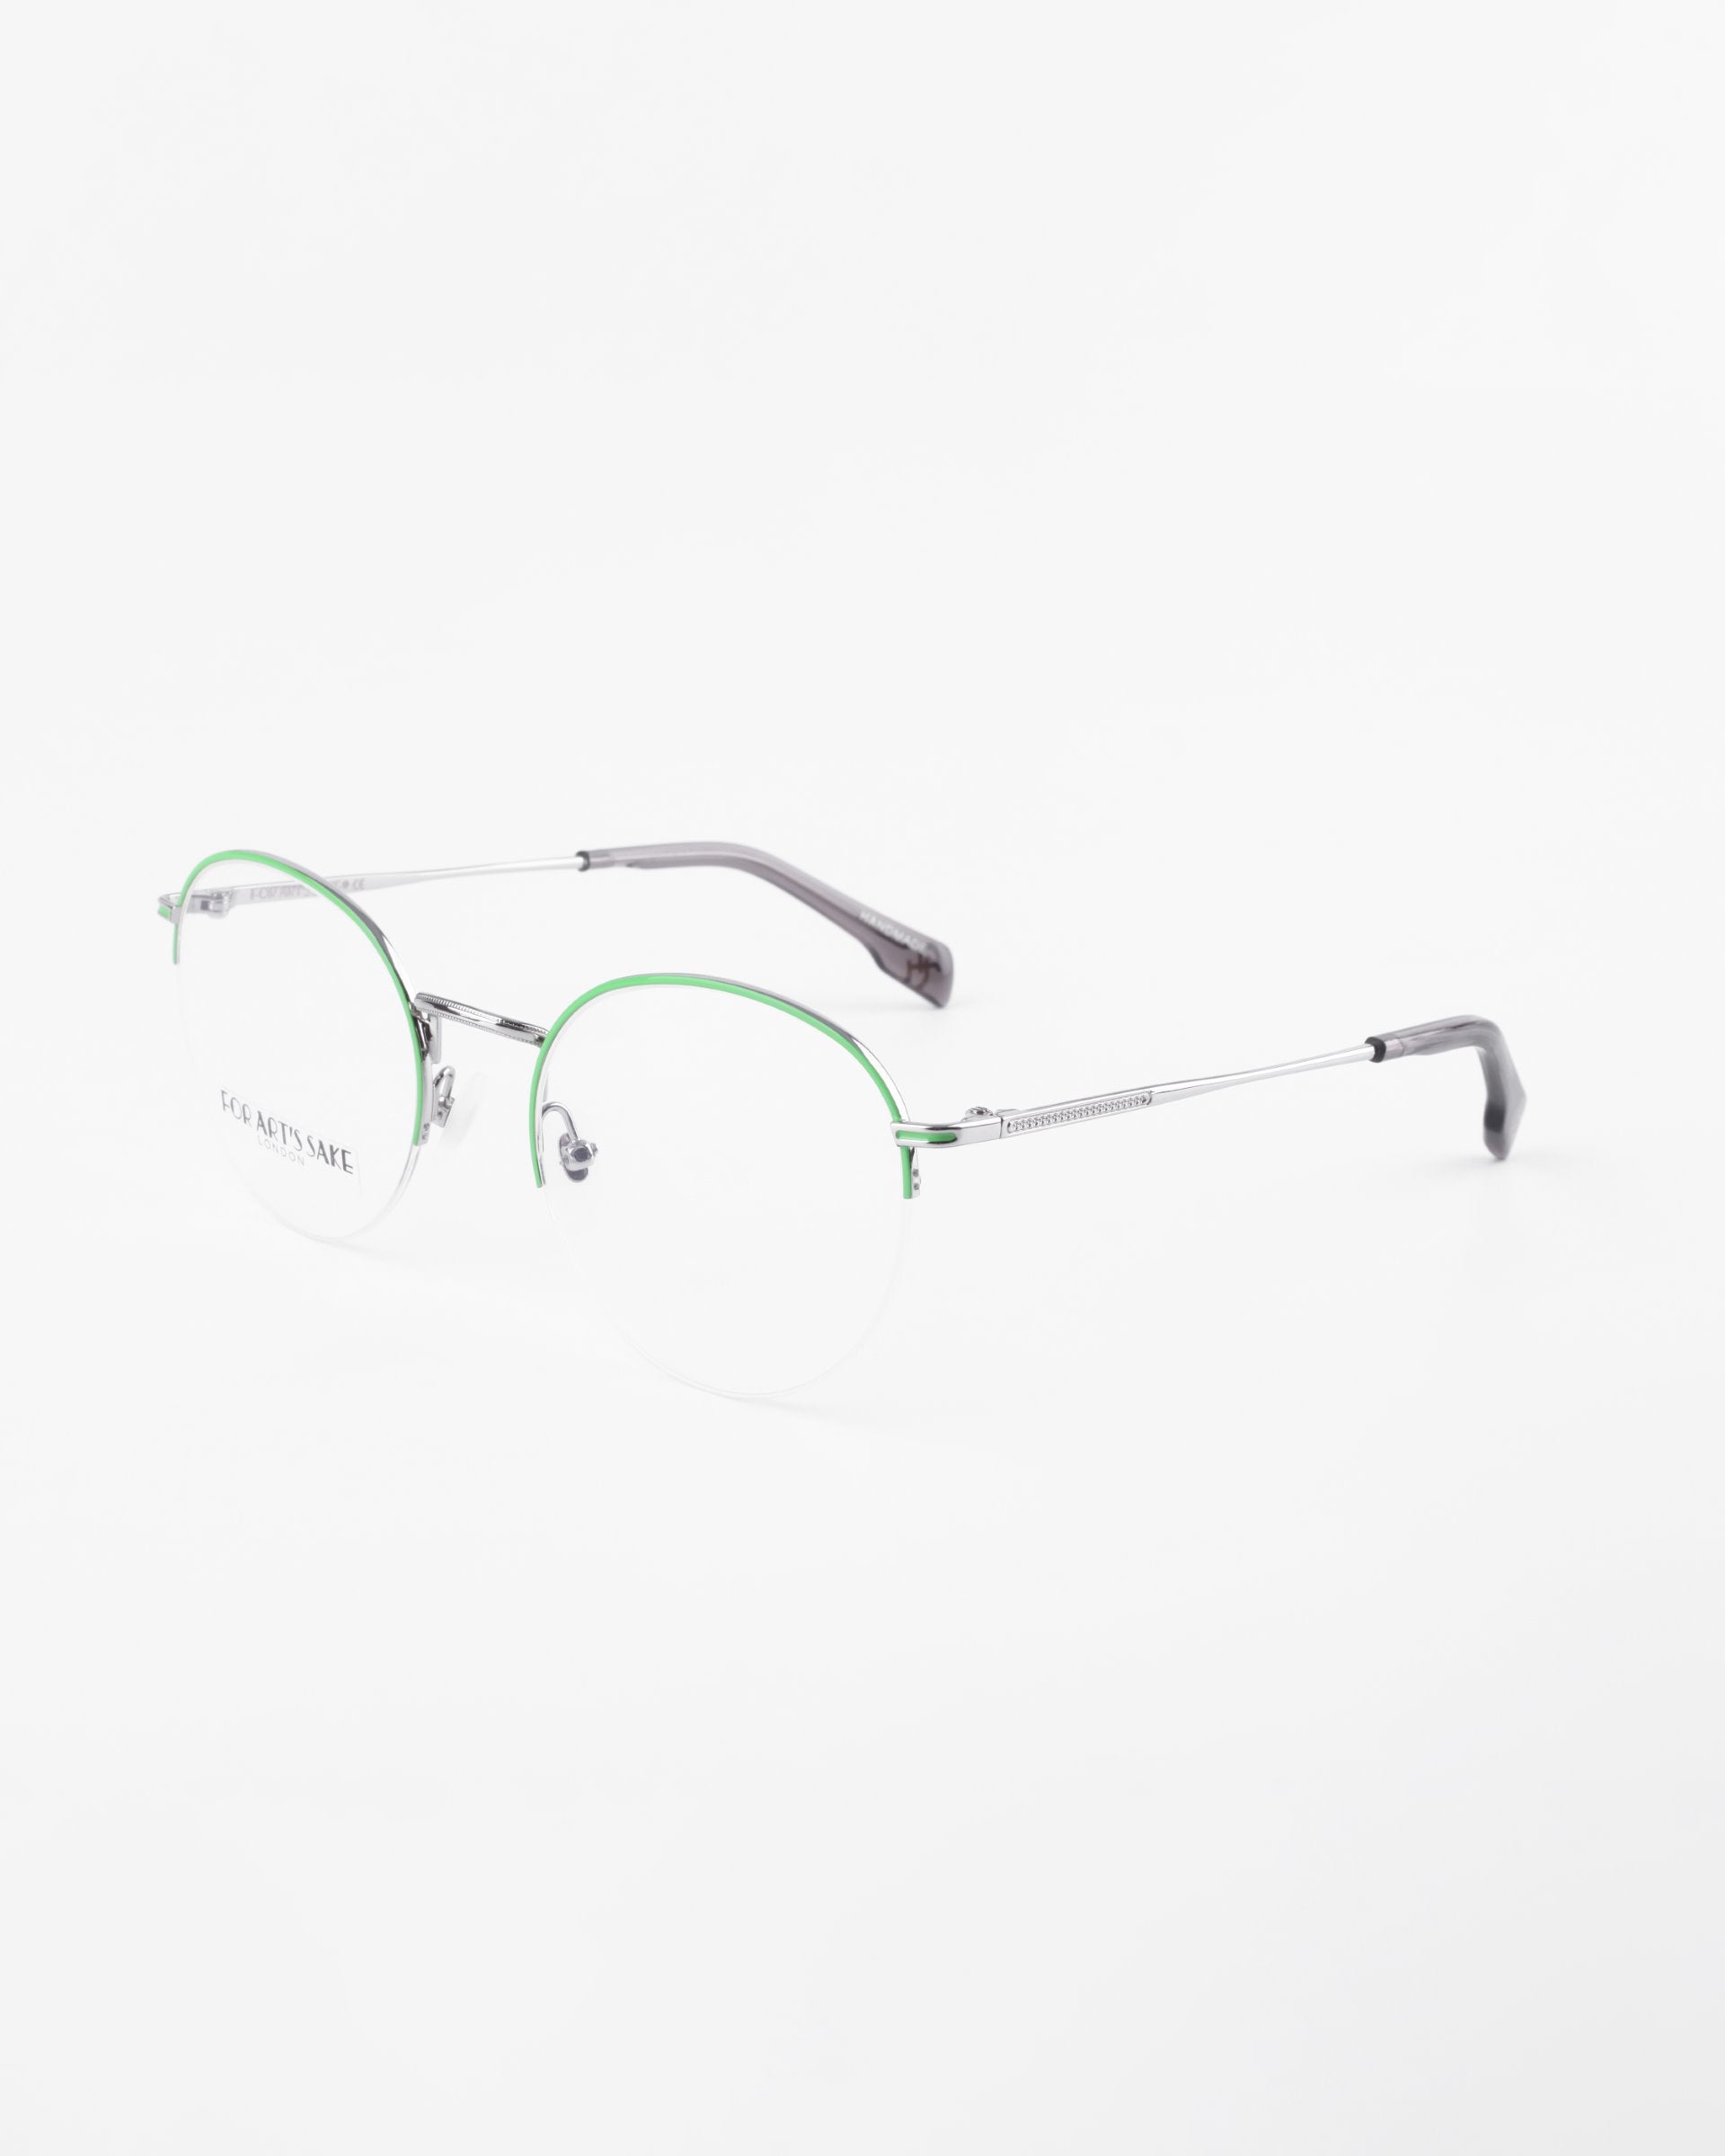 A pair of For Art&#39;s Sake® Ivy eyeglasses with thin silver metal frames and green accents on the upper rims. The glasses, featuring clear round prescription lenses with a blue light filter, and dark-colored temple tips, are placed on a white background.